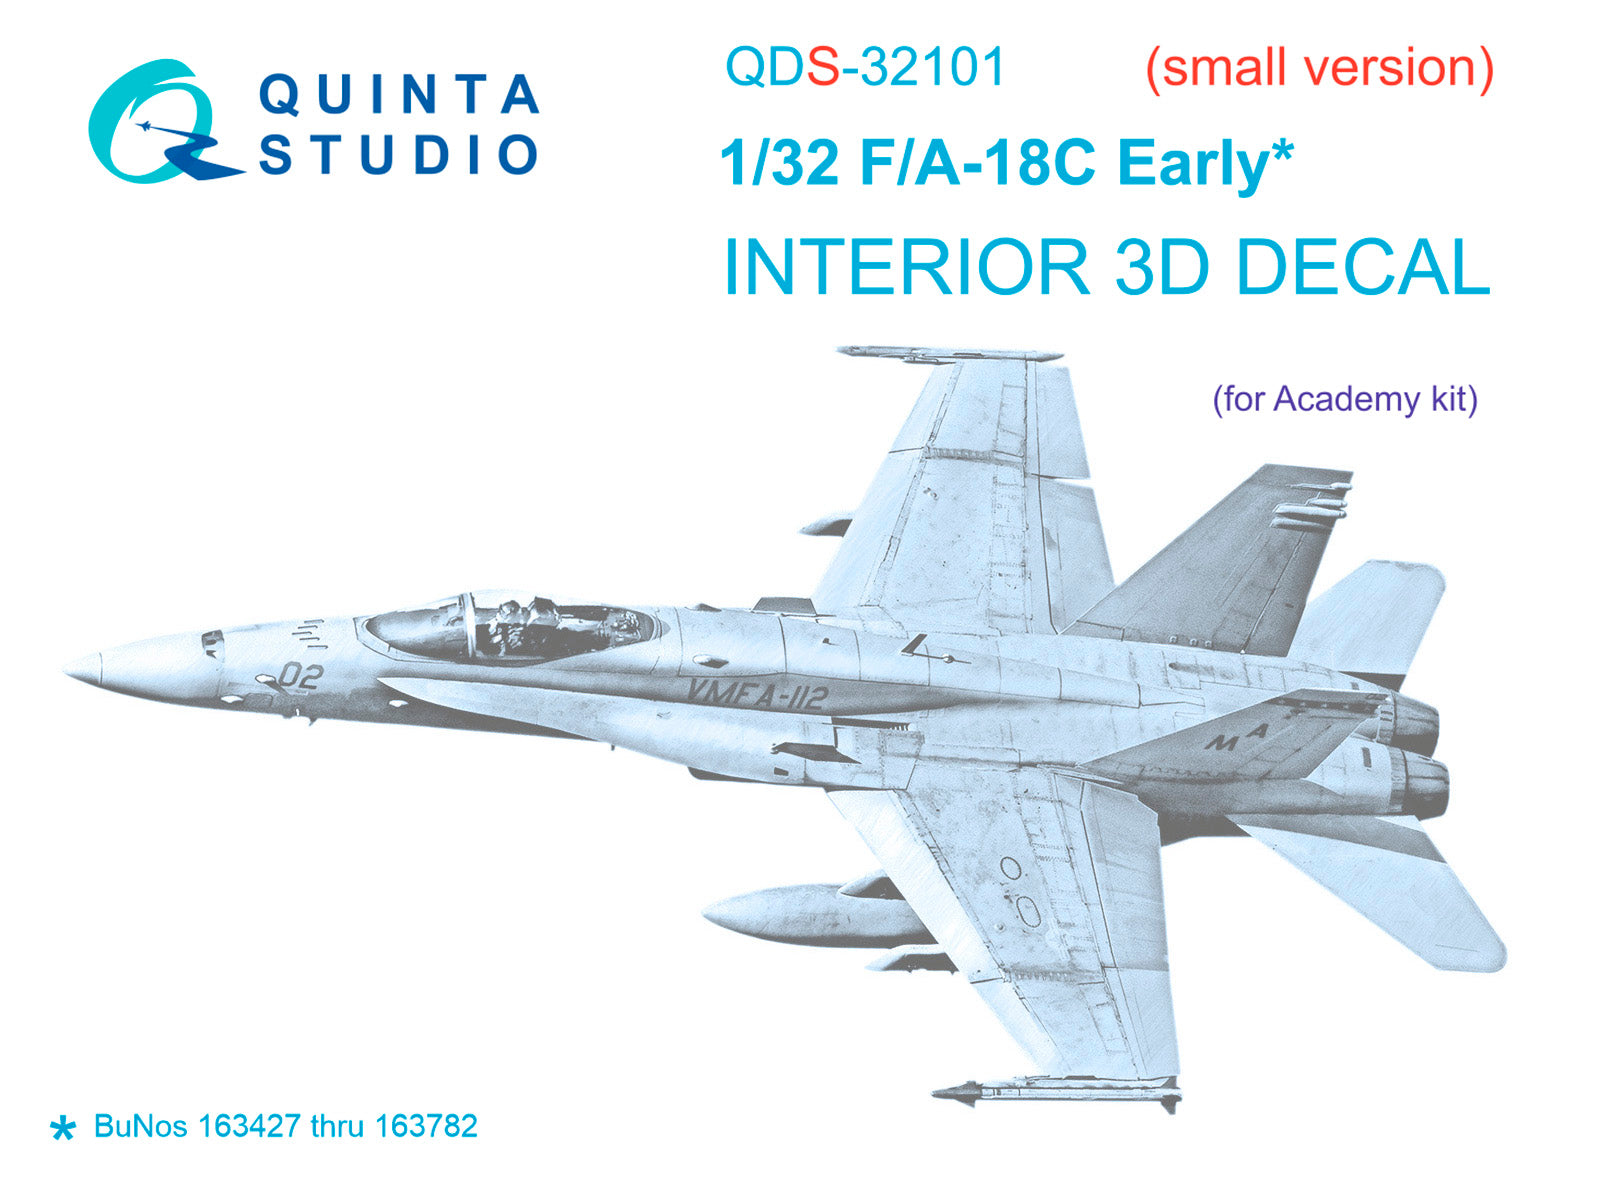 Quinta Studio - 1/32 F/A-18C Early QDS-32101 for Academy kit (small version)